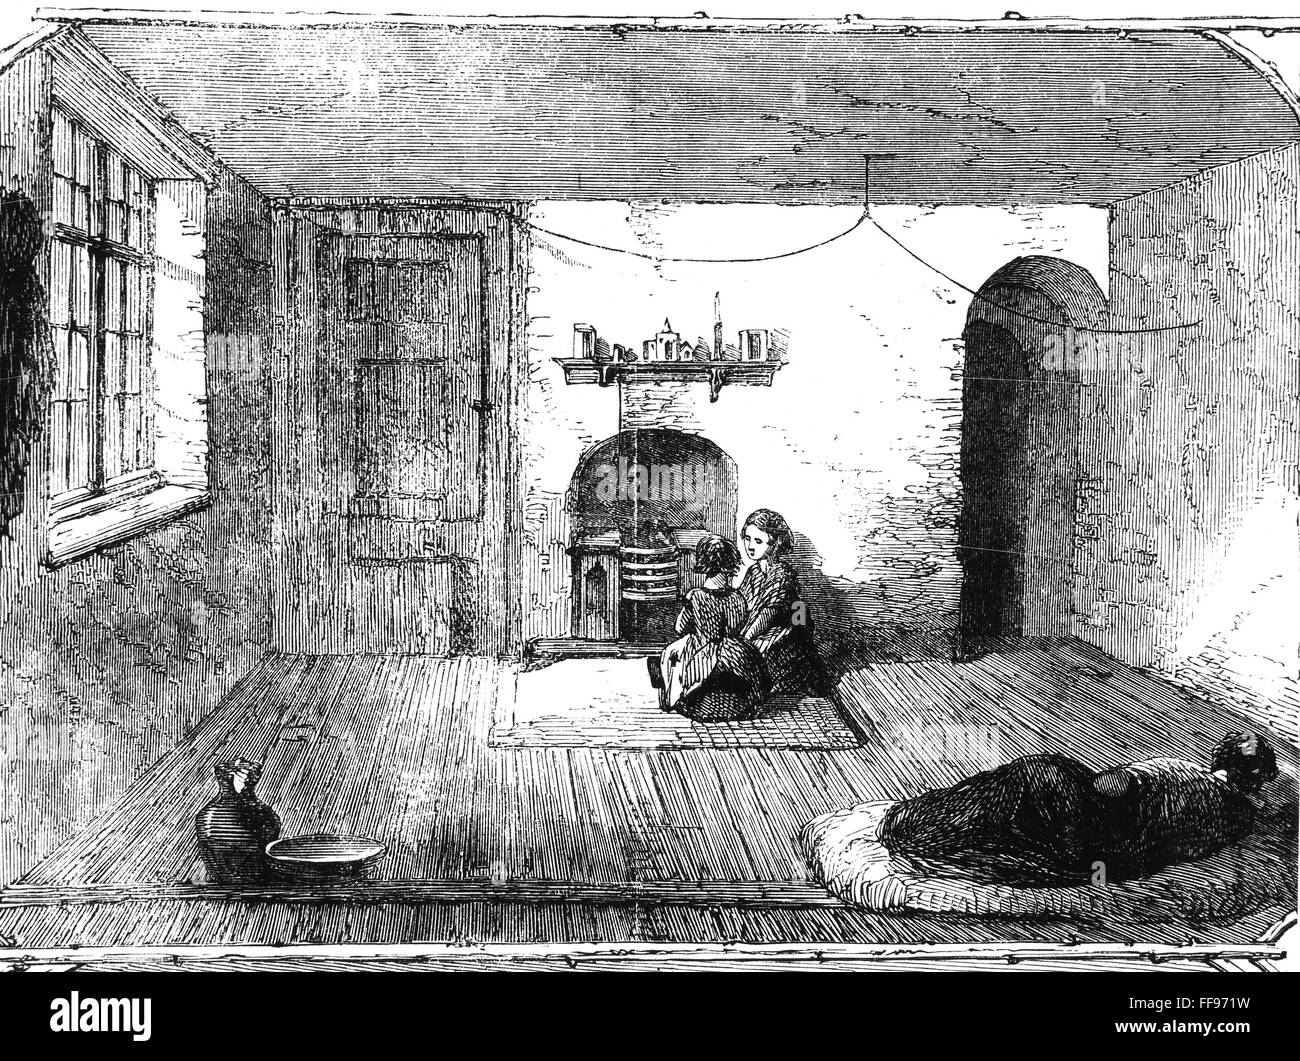 ENGLAND: COTTON FAMINE. /nThe home of a Manchester mill worker during the cotton famine in England following the Union blockade of Confederate ports during the American Civil War. Wood engraving, English, 1862. Stock Photo